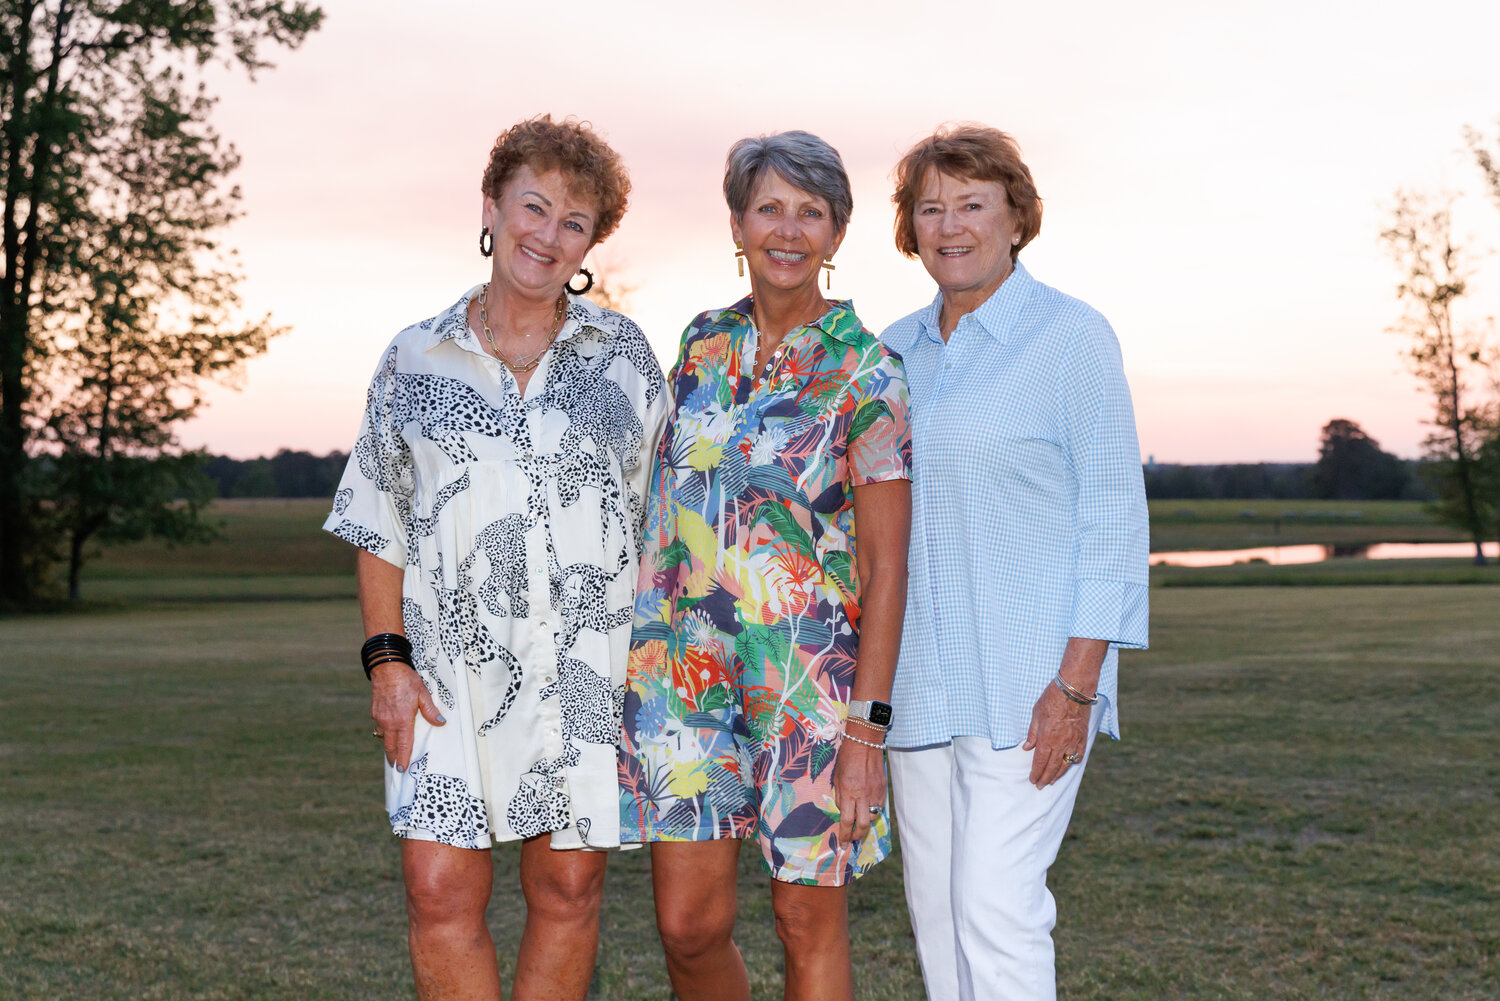 Cape Fear Valley Health presents CityView Media's third annual Ladies' Night Out, sponsored by Hinkamp Jewelers and Mercedes of Fayetteville, was held April 20 at the Carolina Barn at McCormick Farms.